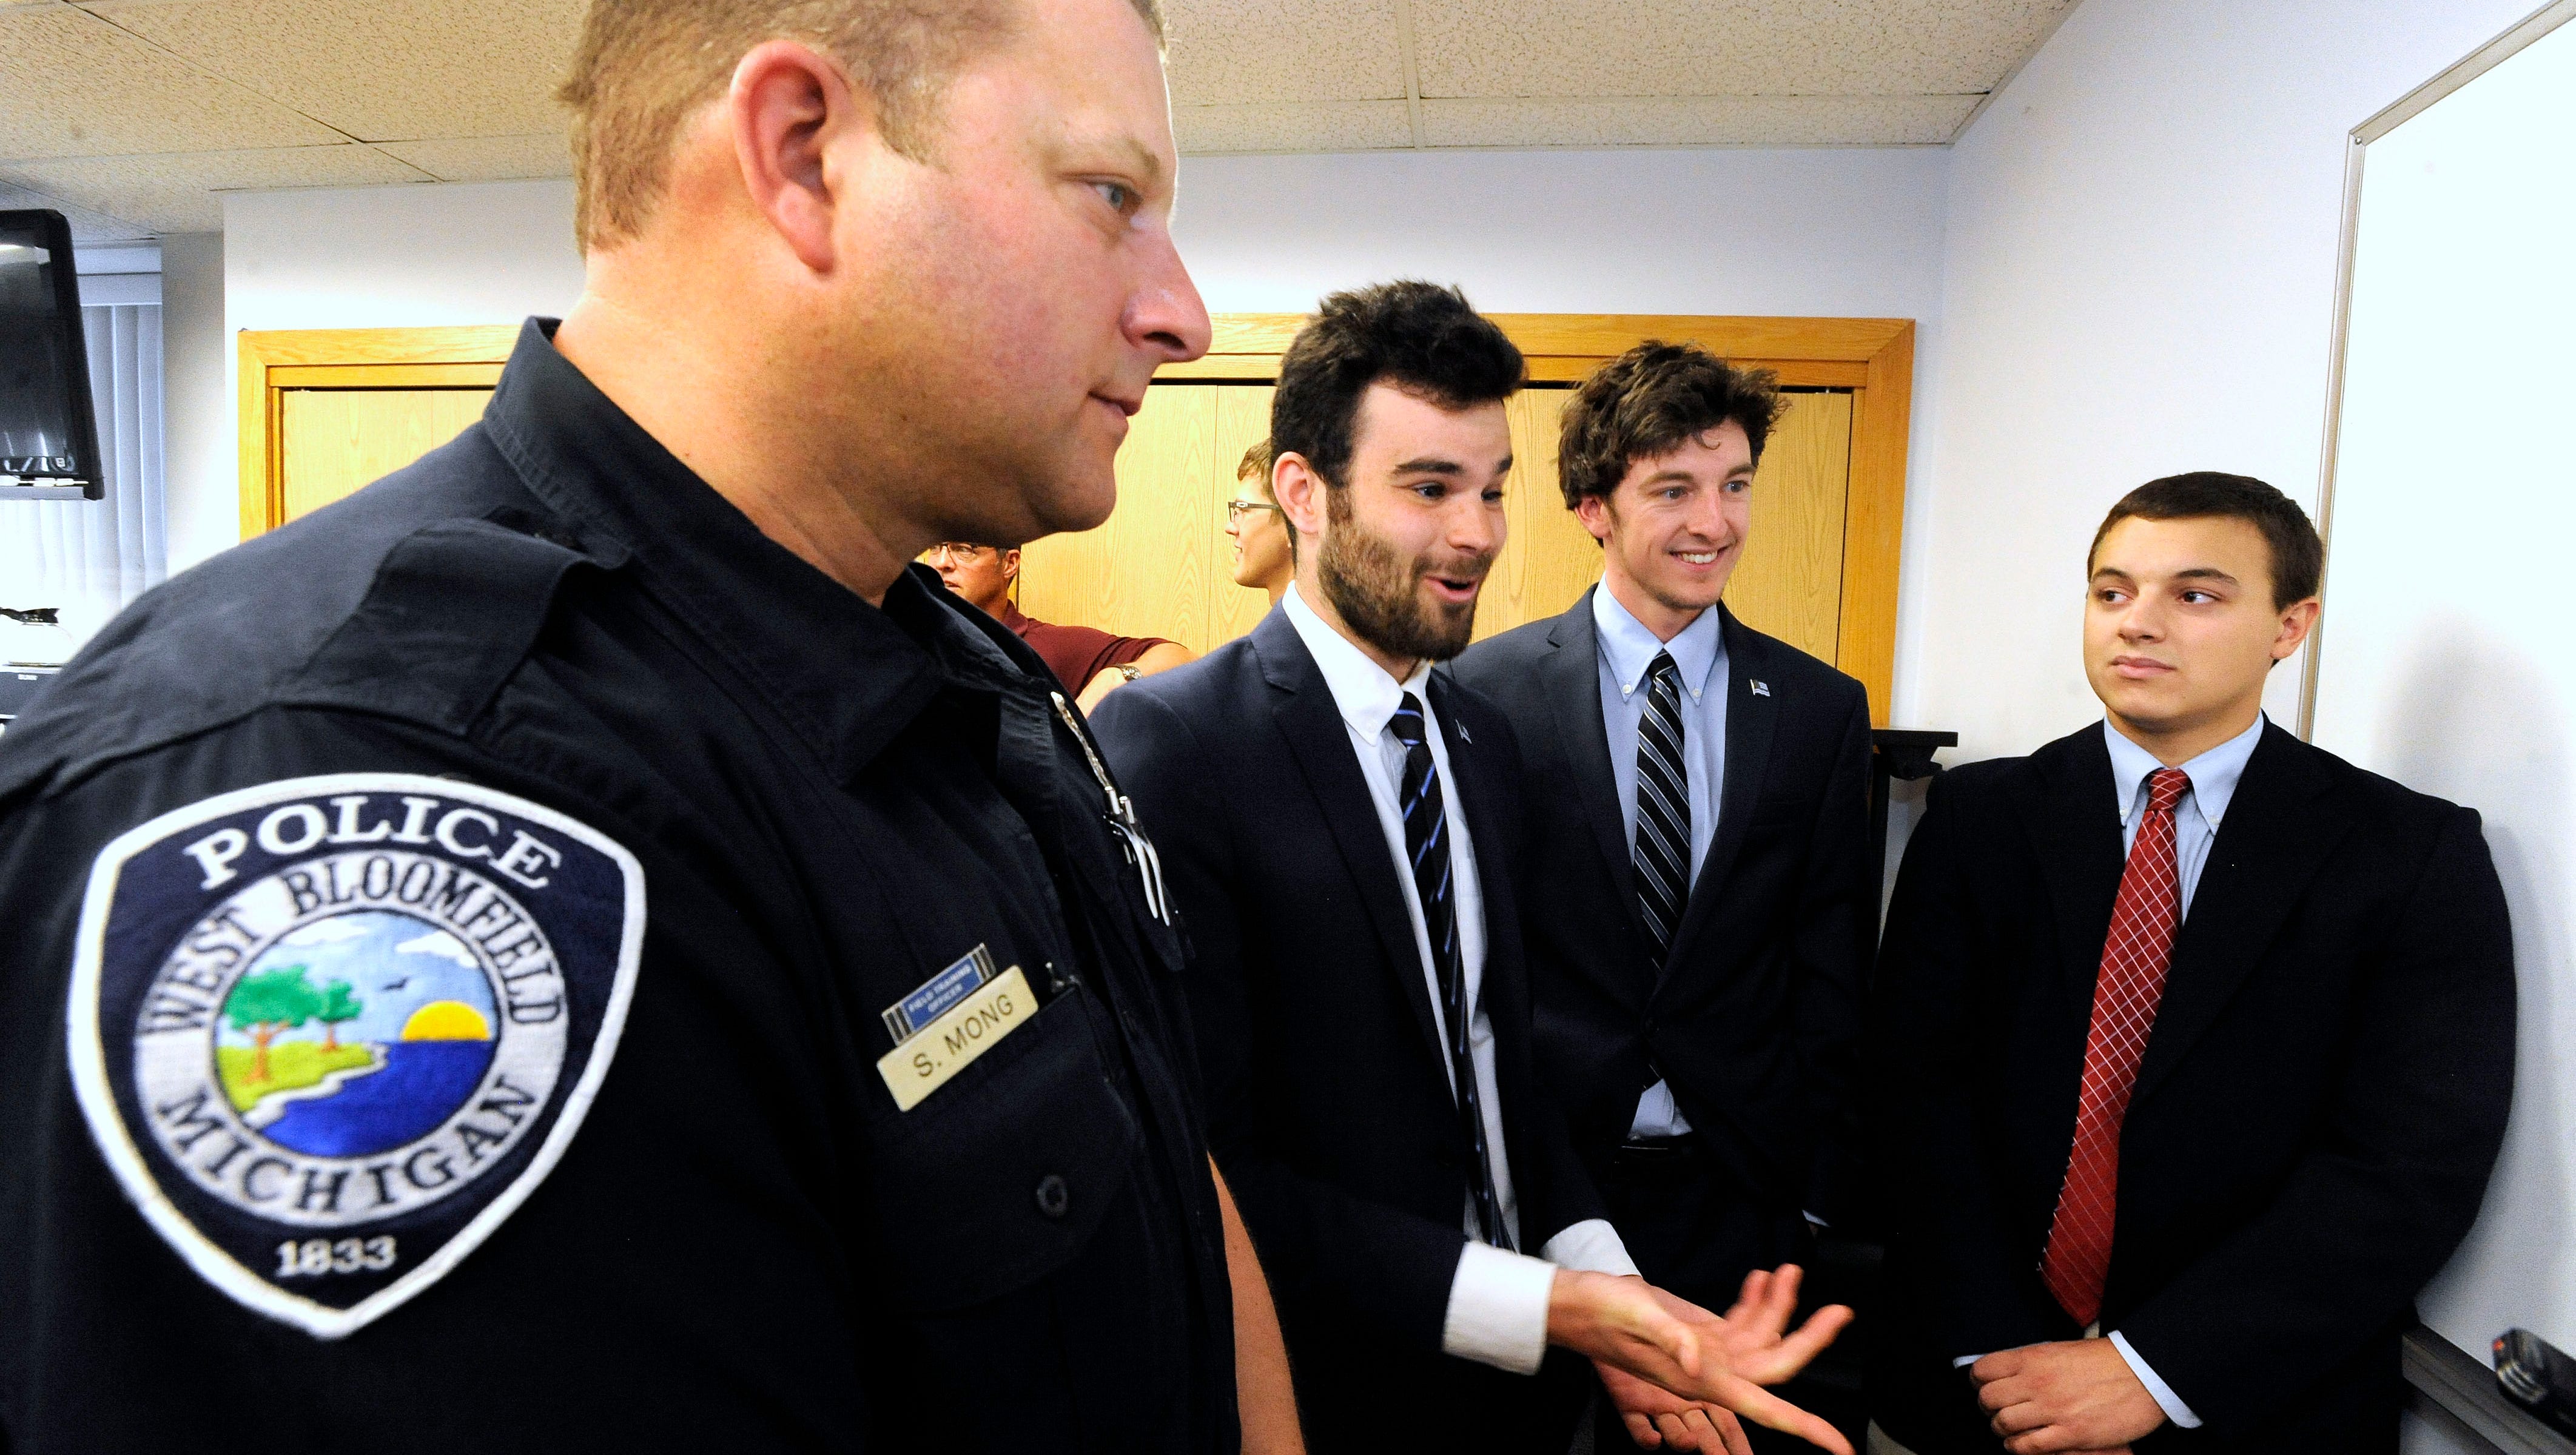 From left, West Bloomfield Twp. police officer Scott Mong, Thin Blue Line USA founder and president Andrew Jacob, vice president Pete Forhan and Mong's son, Devin Mong, 18, talk with The Detroit News after Devin, who is going to Virginia Tech, received a $2,500 scholarship check. Four children of West Bloomfield Twp. police officers each received $2,500 college scholarship checks,  May 18, 2017, during a ceremony at the department as attendees remember police officers who gave their lives in the line of duty during National Police Week.